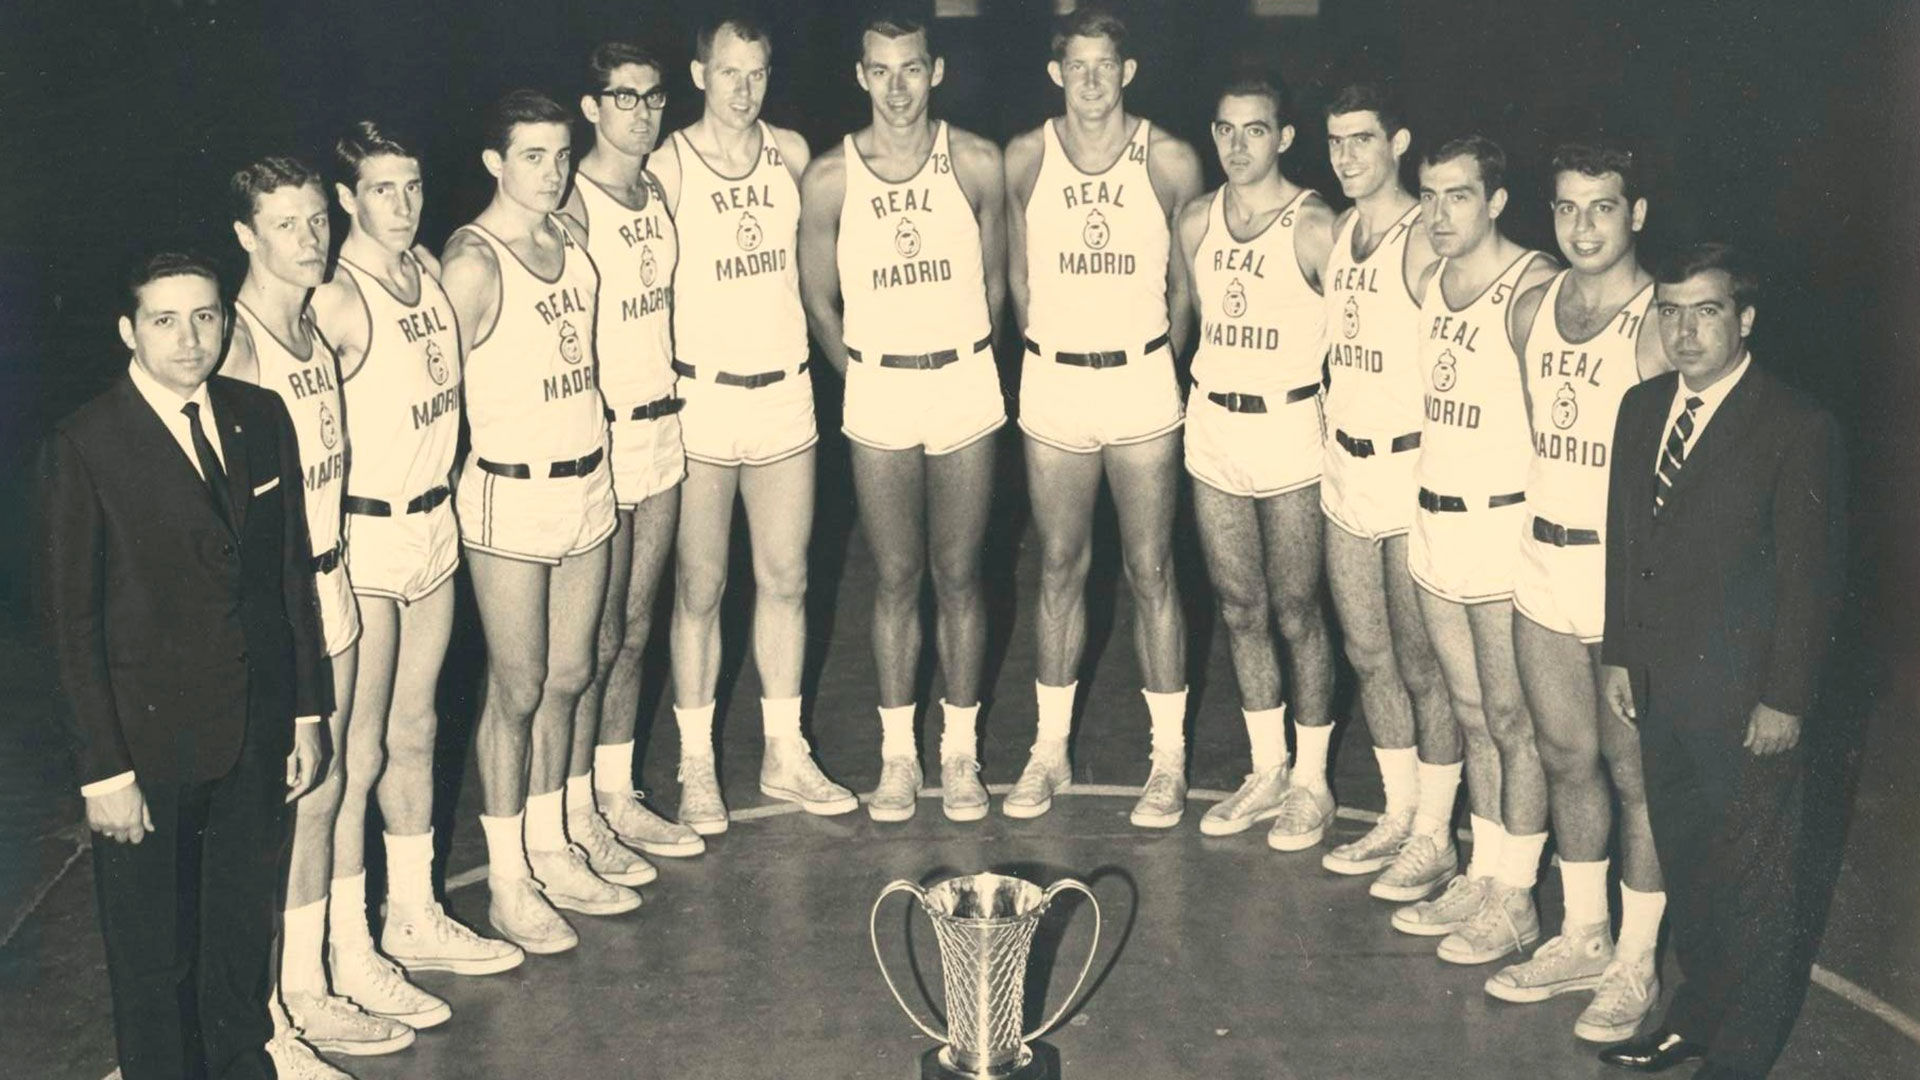 We won our first European Basketball Cup 60 years ago